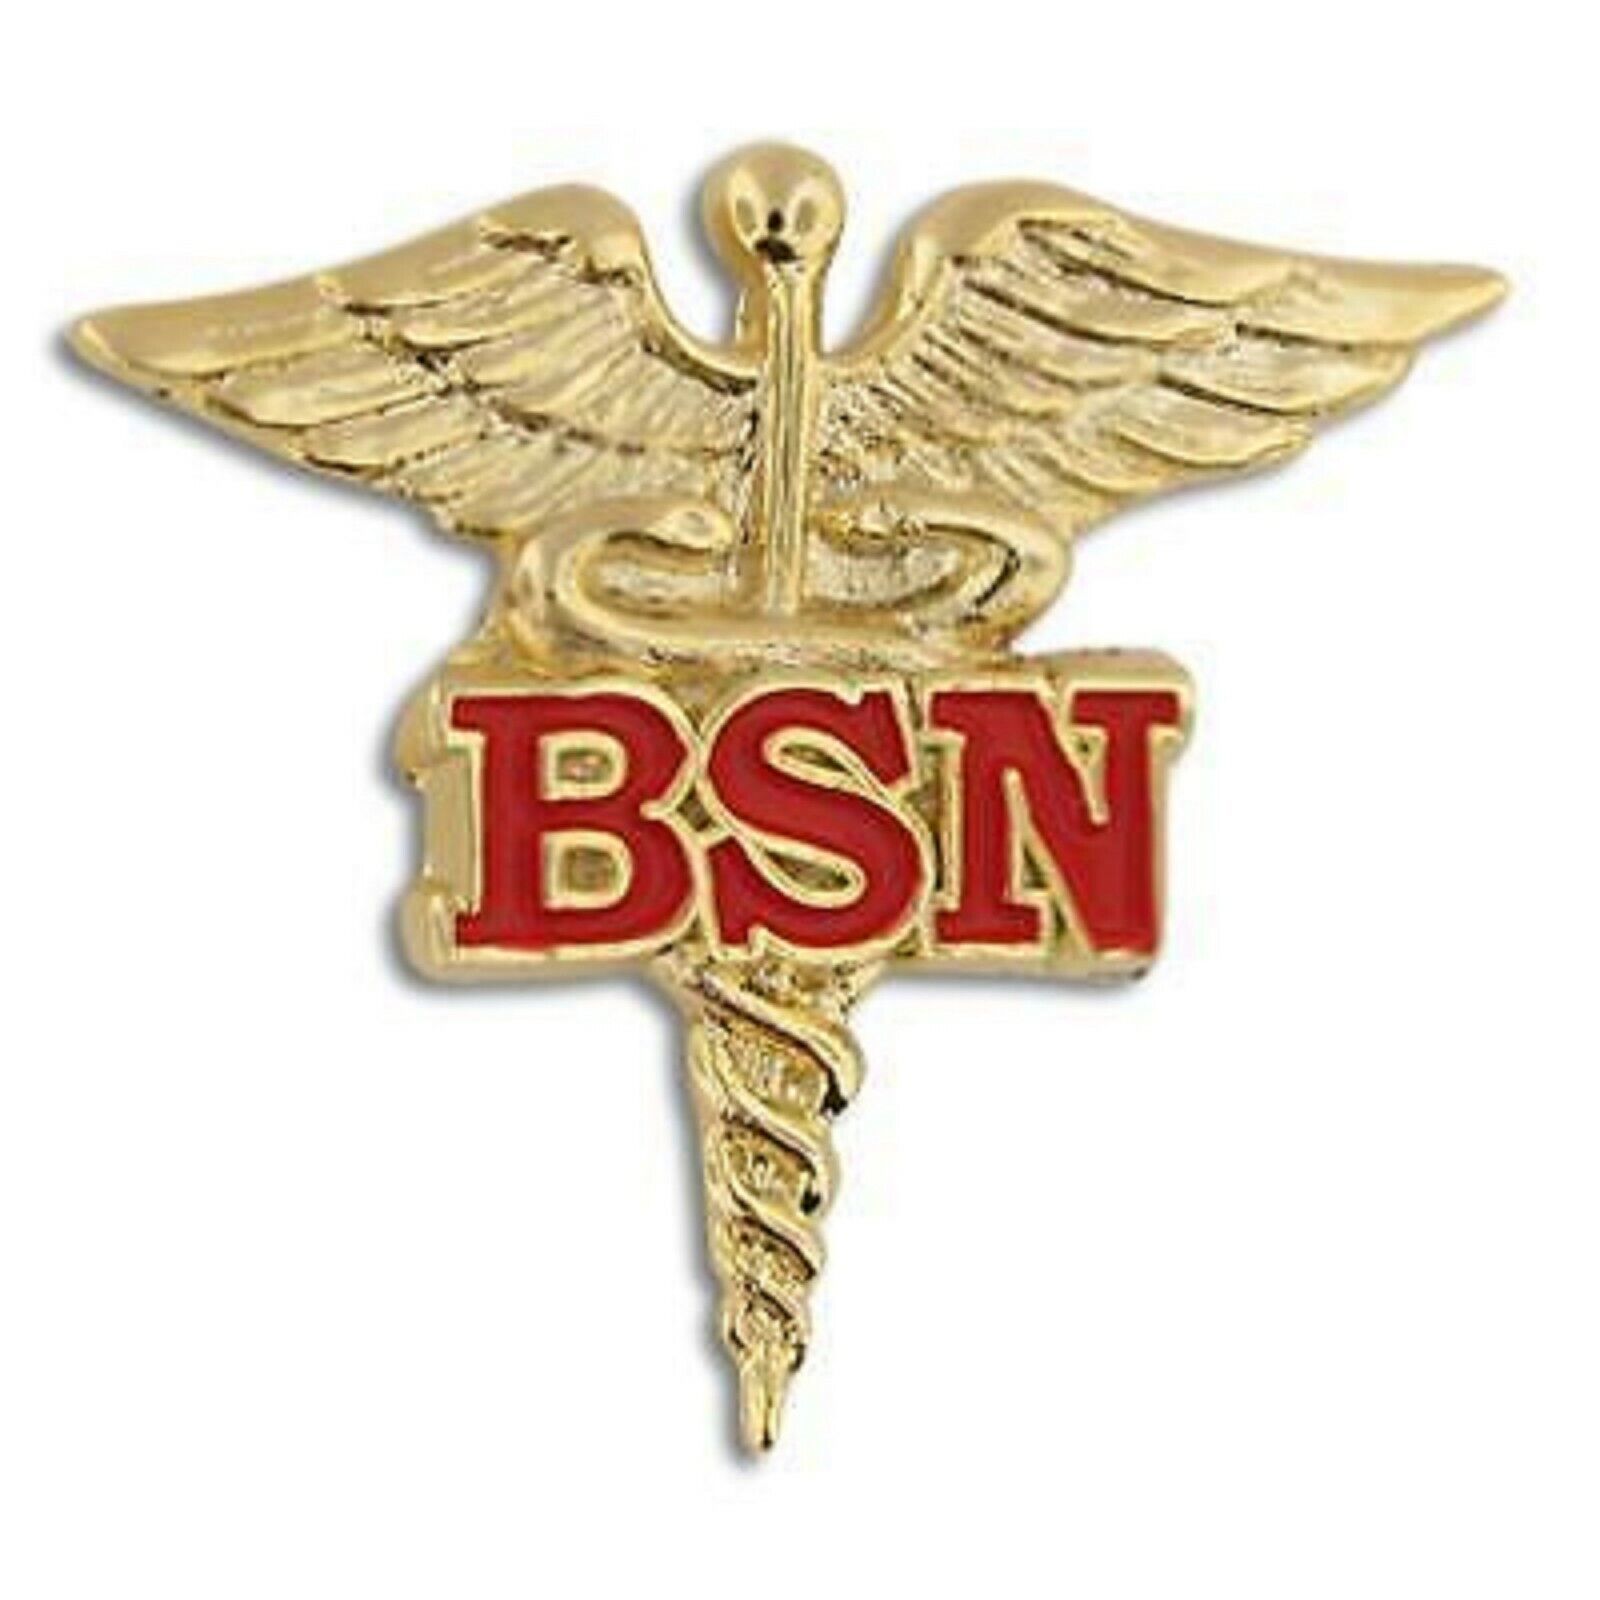 Primary image for BSN BACHELOR OF SCIENCE NURSING NURSE GOLD CADUCEUS RED MEDICAL BADGE PIN